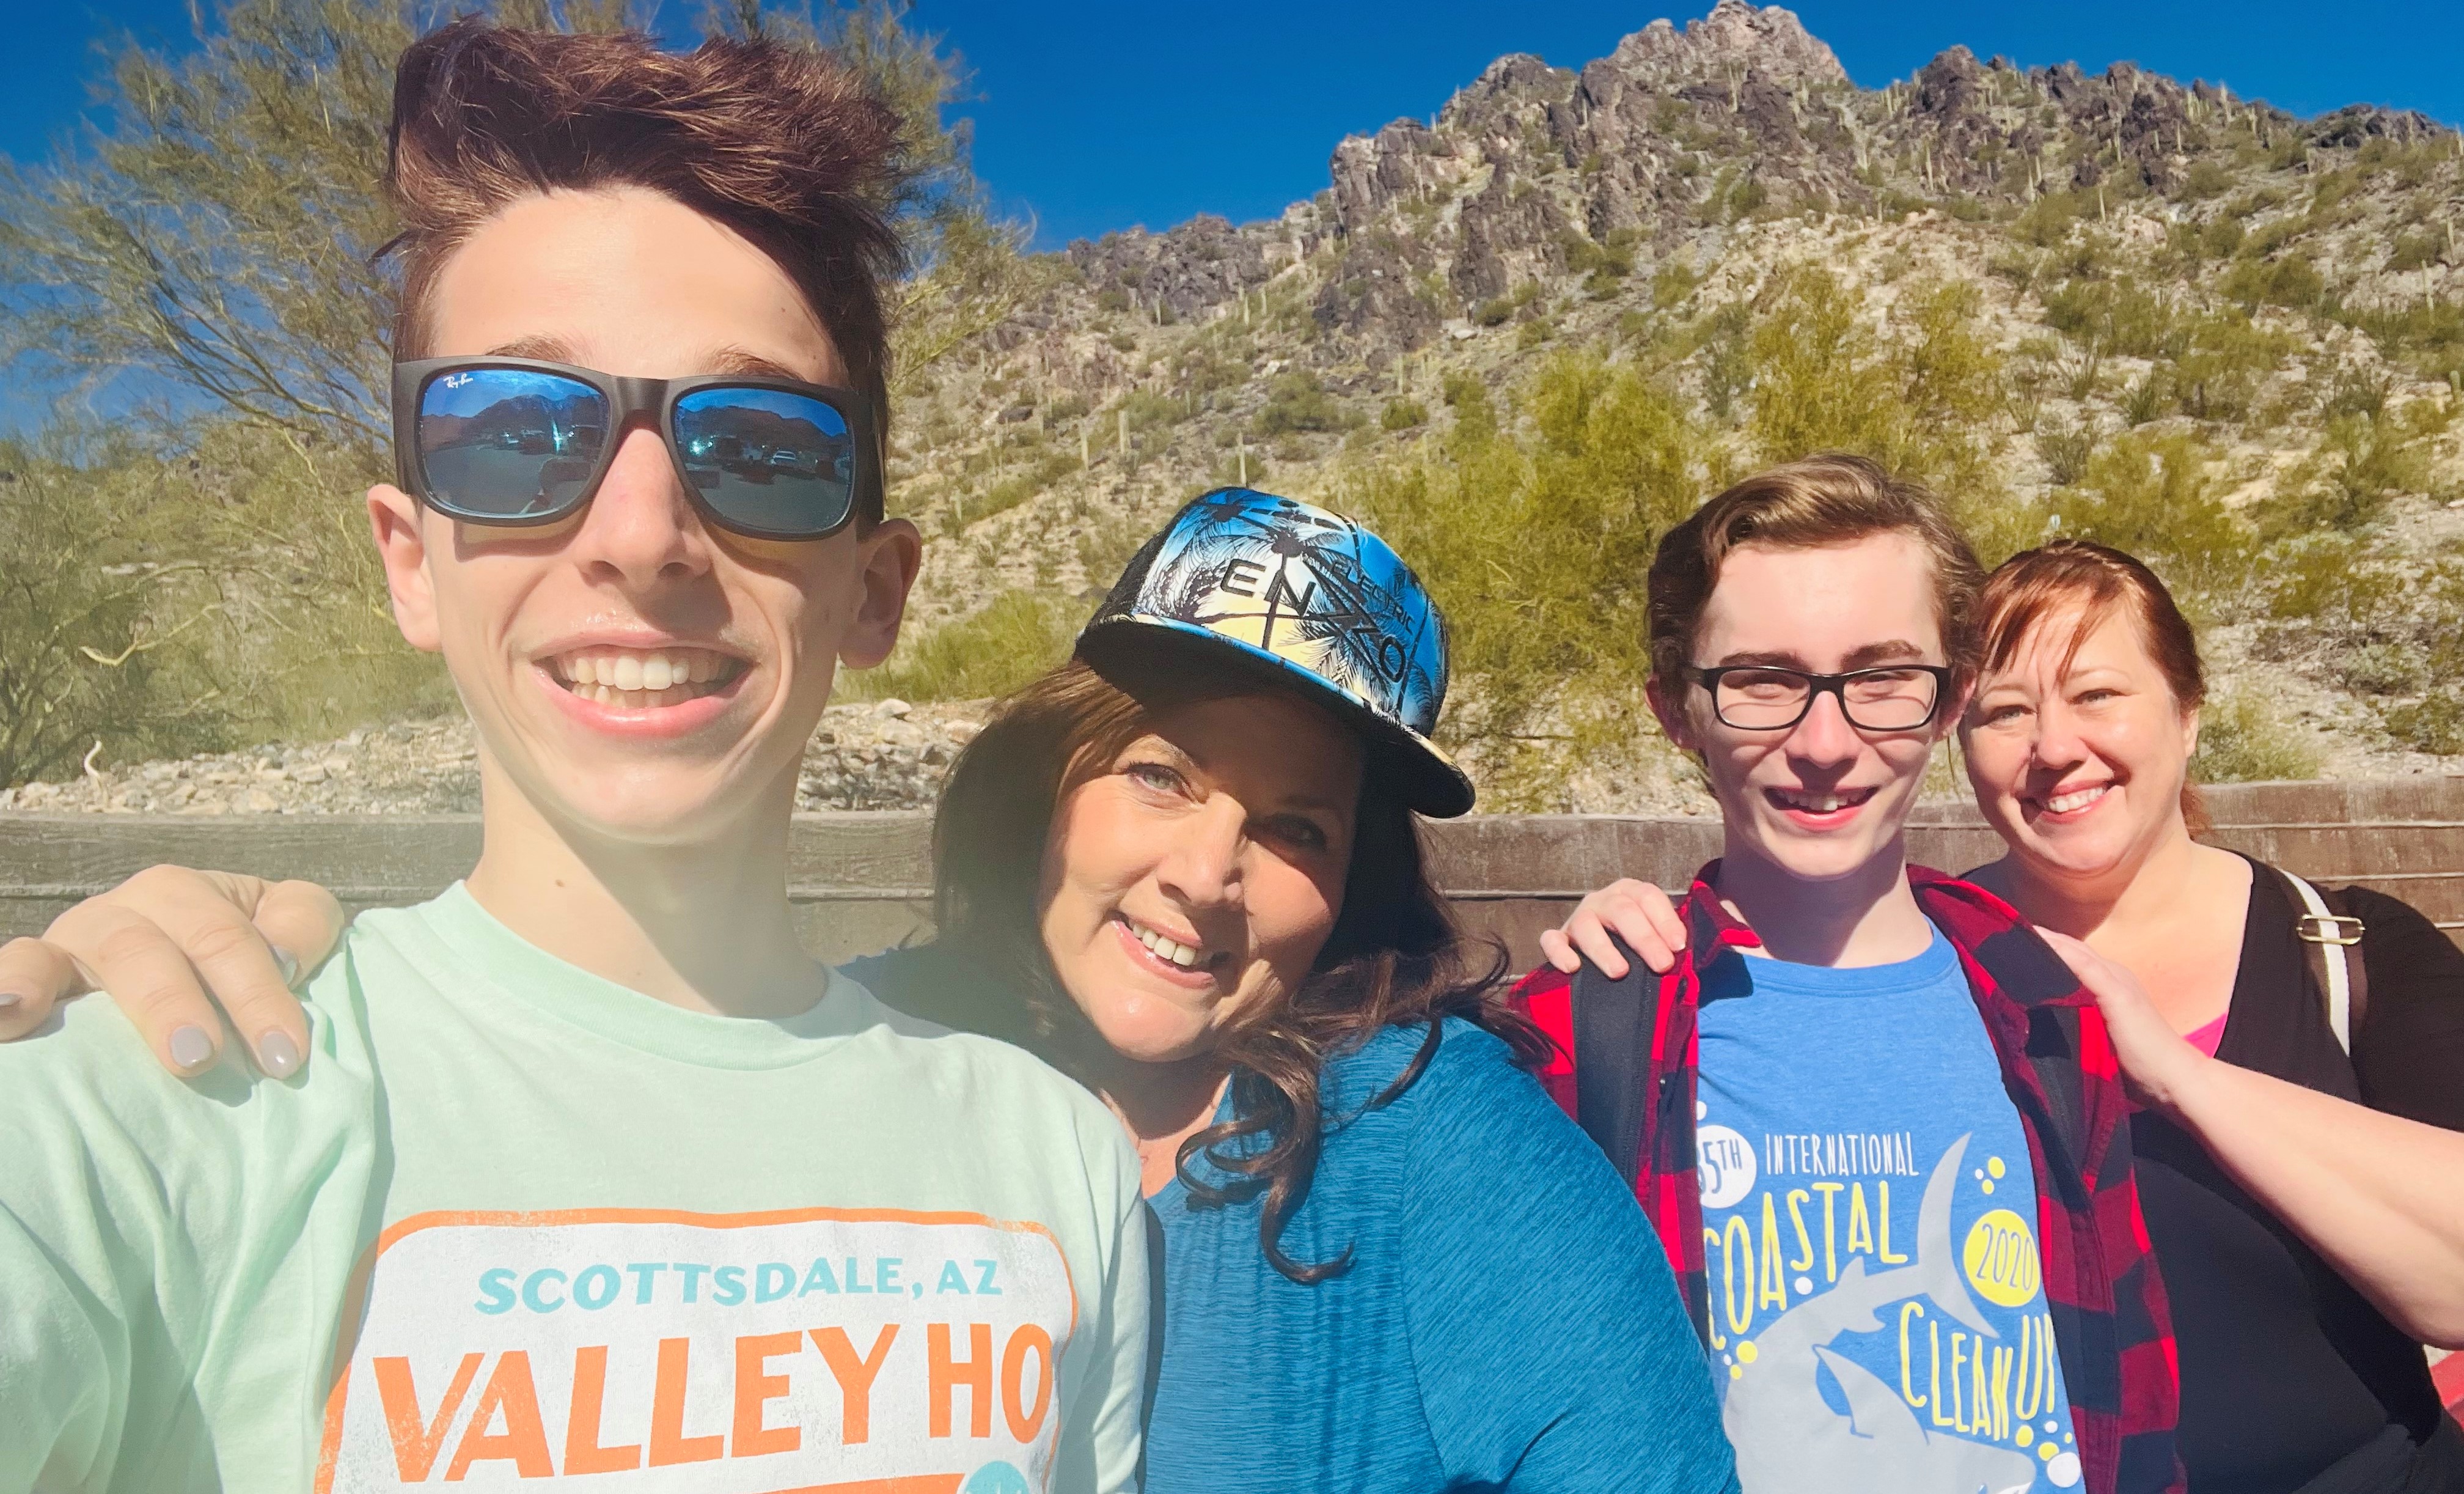 Picking up the Sonoran Desert during one of the 5-star rated Phoenix hiking tours from the Wild Bunch are (left to right): Enzo DeFerrari Wilson, 15; his mother Christine DeFerrari; Ryan Moraleutz, 14 and his mom Angela Moraleutz.